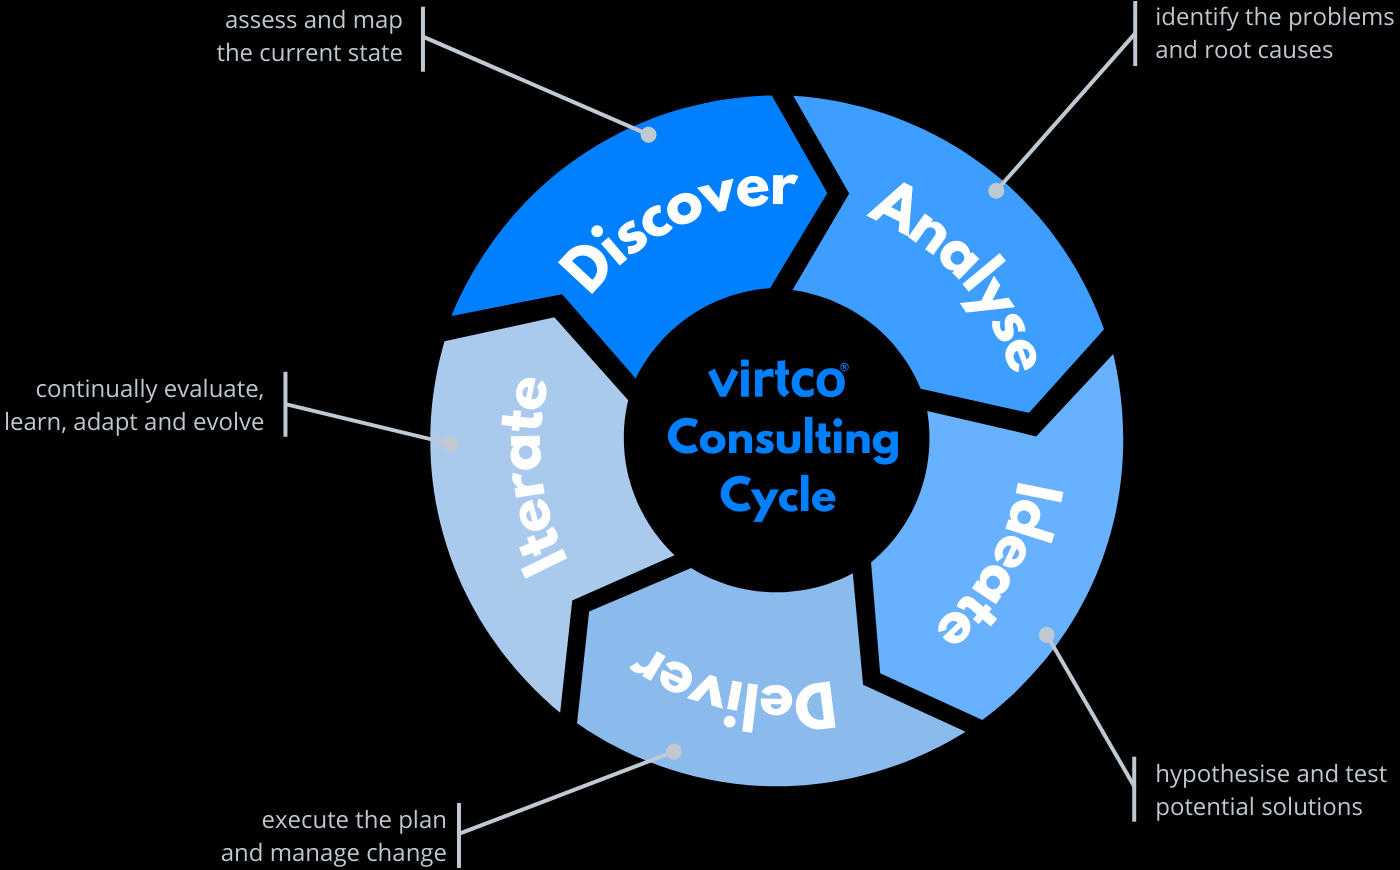 Virtco consulting cycle